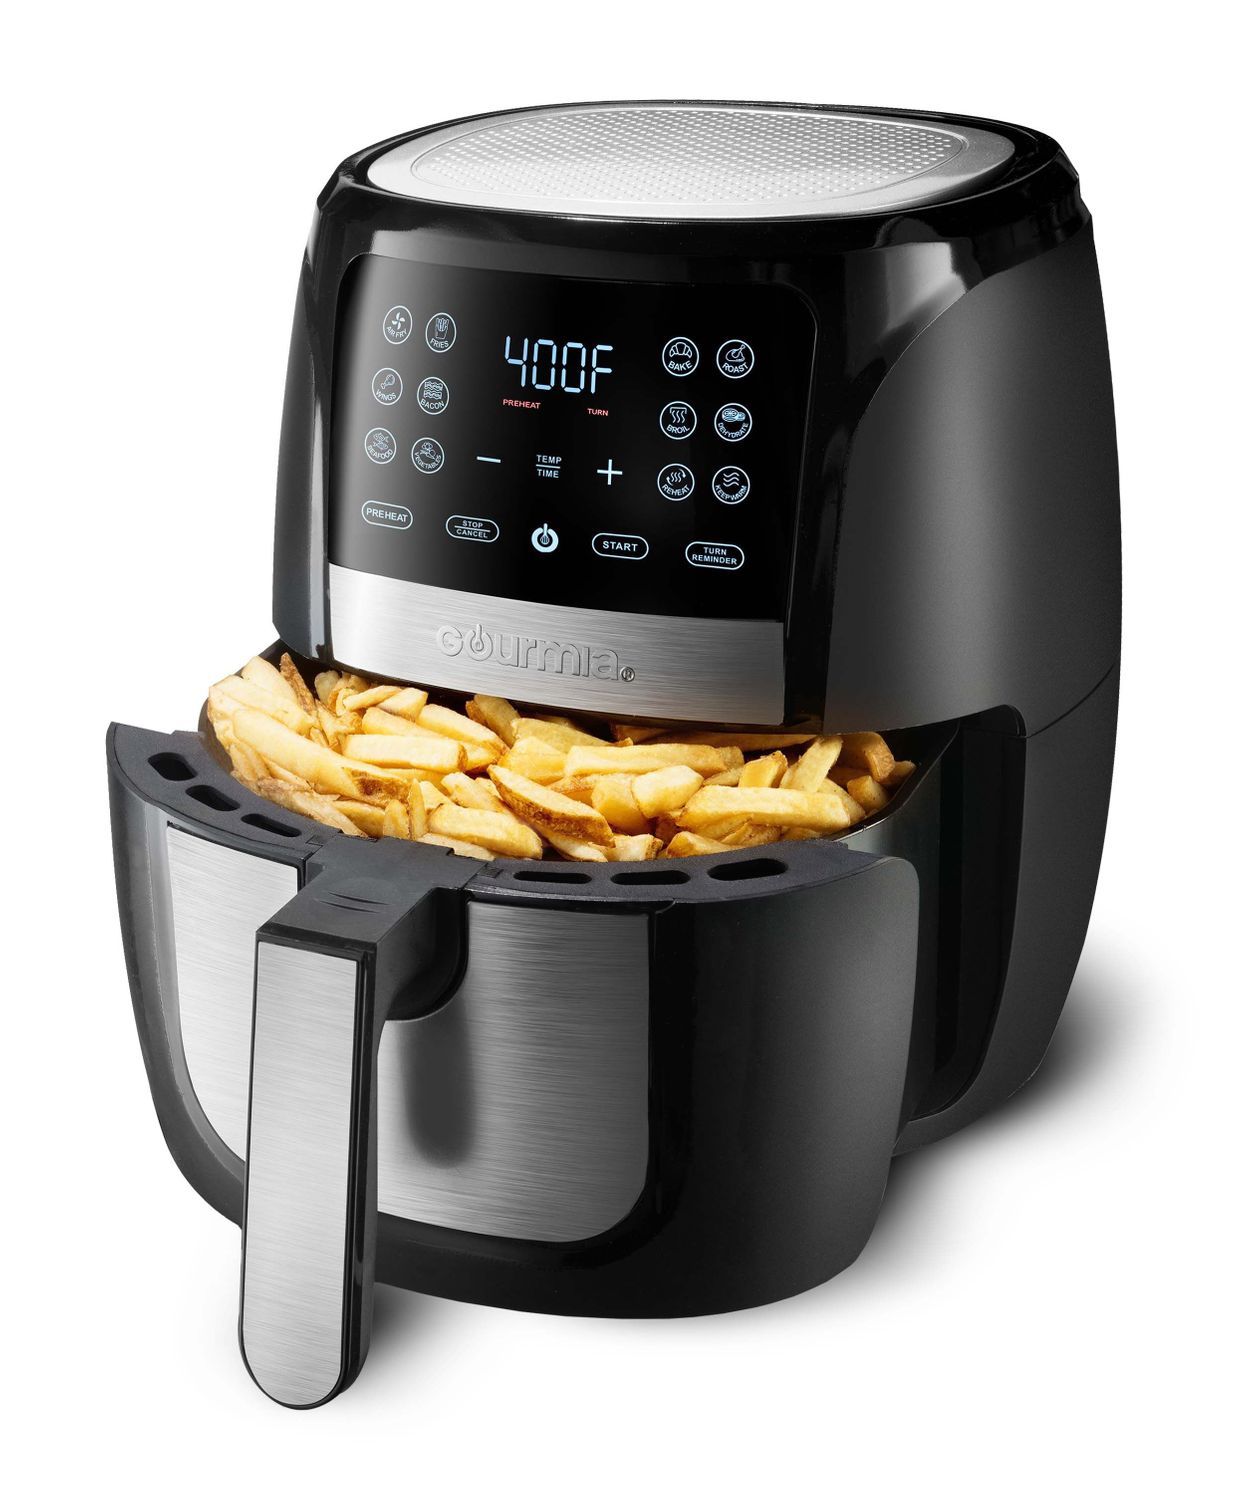 An image showing beautifully crisped french fries in the air fryer basket